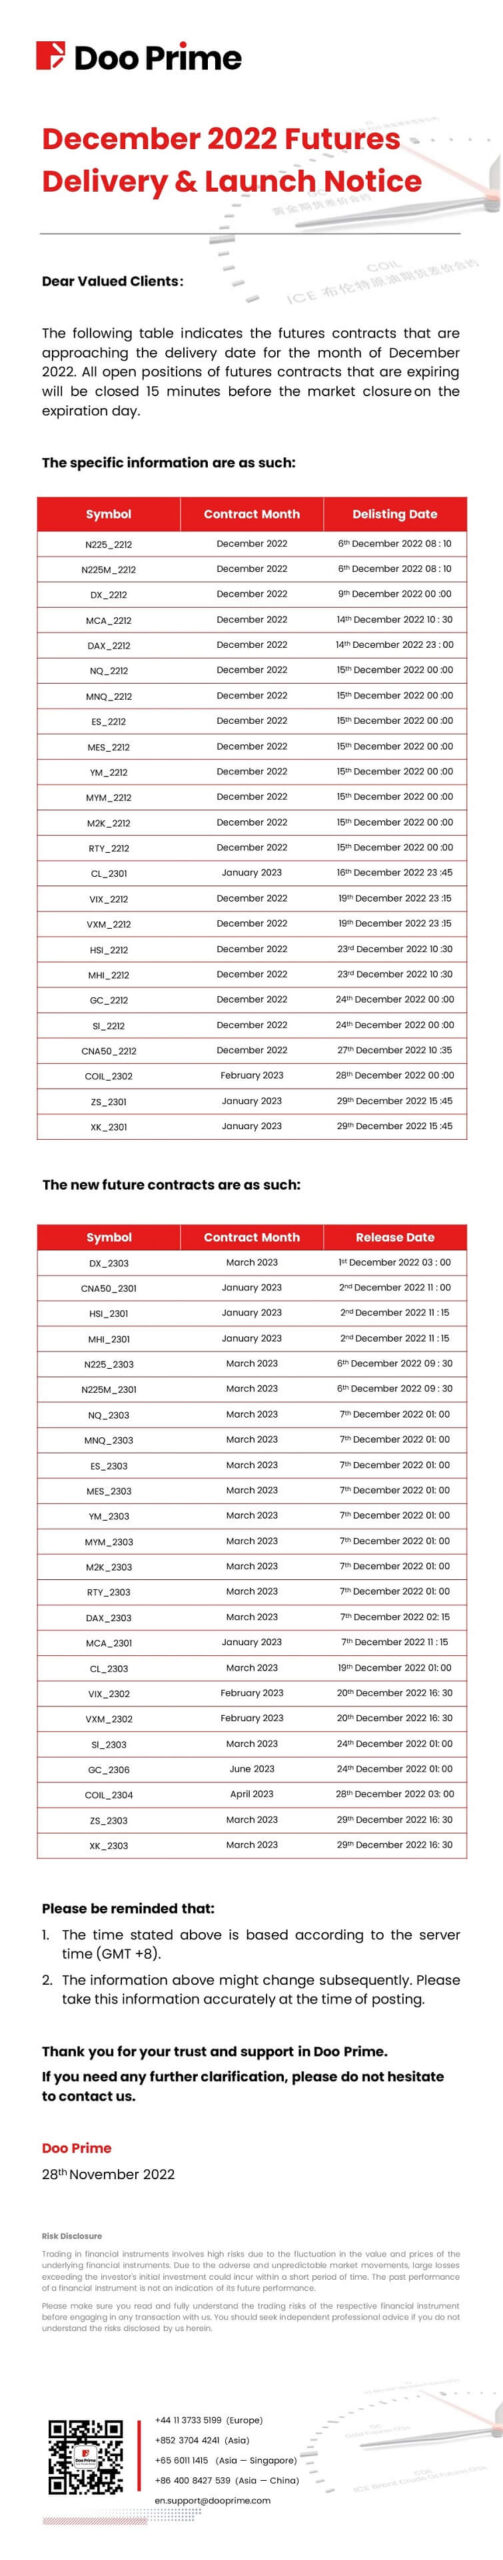 Doo Prime December 2022 Futures Delivery & Launch Notice